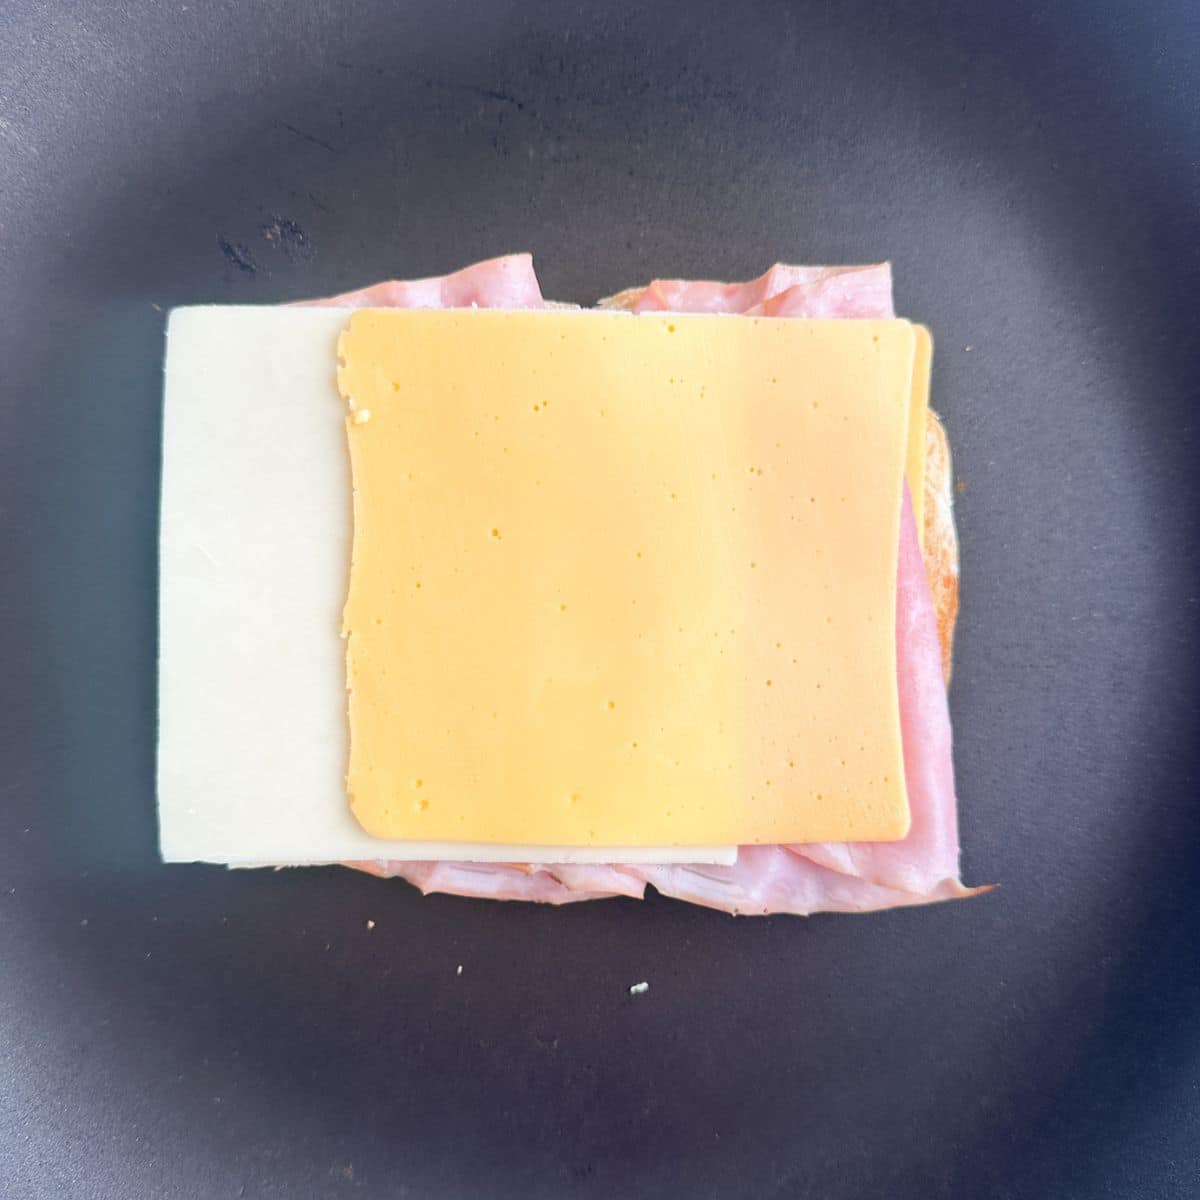 Sliced cheese on ham and bread. 